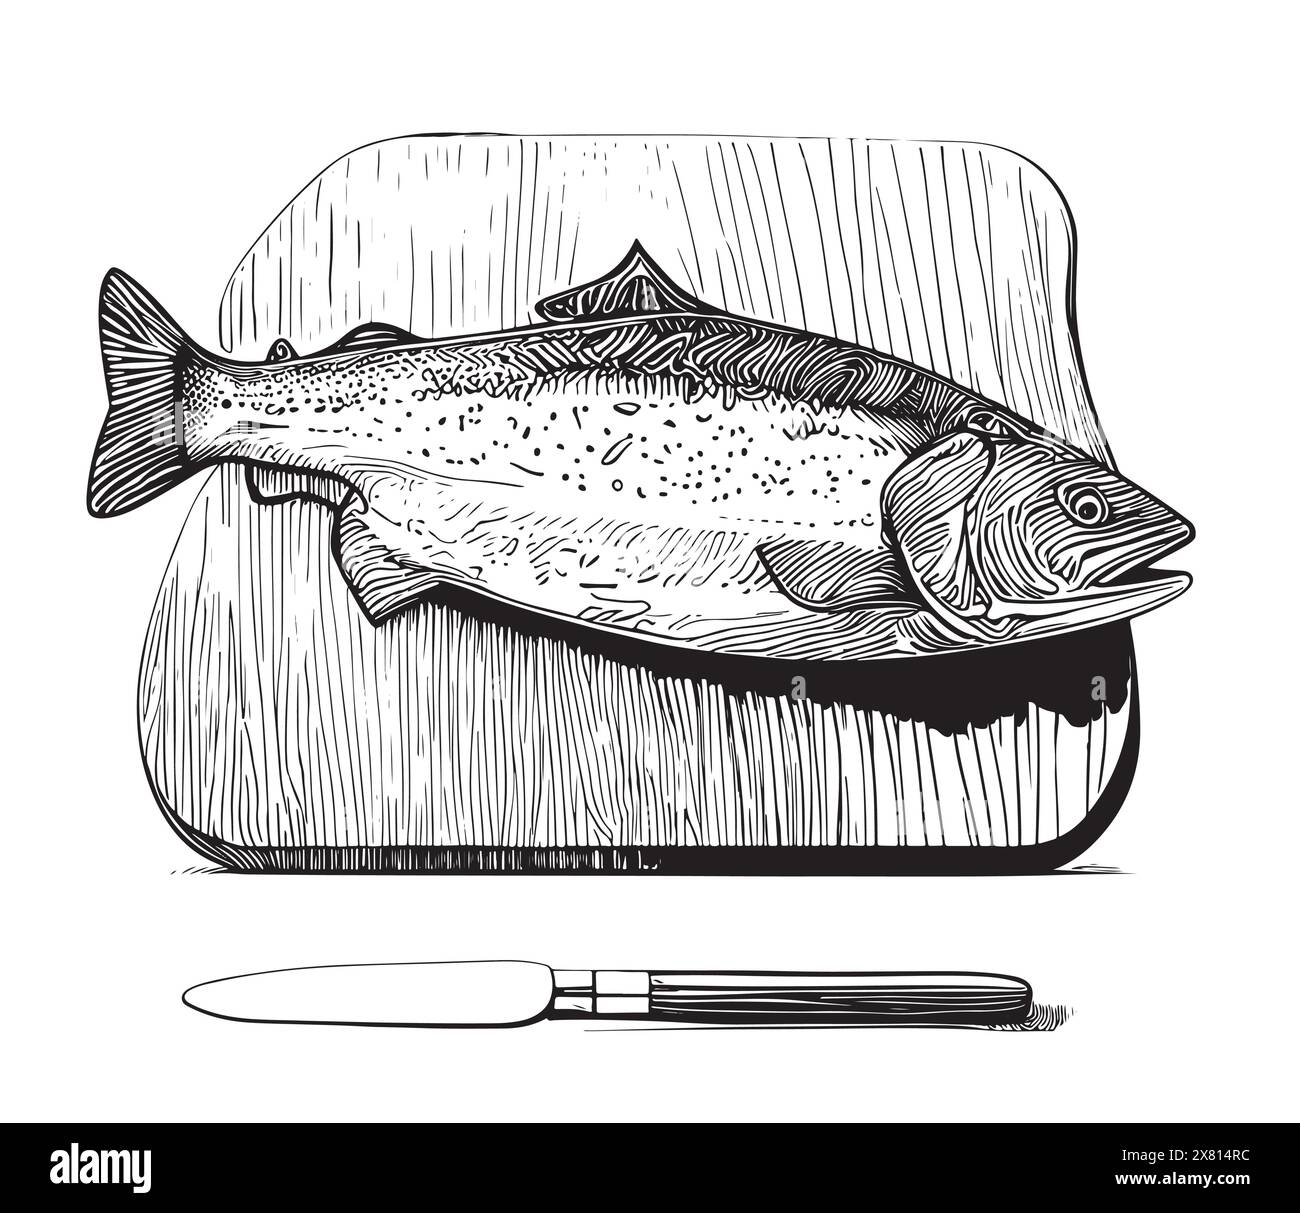 fish steak on cutting board hand drawing sketch engraving illustration style Stock Vector